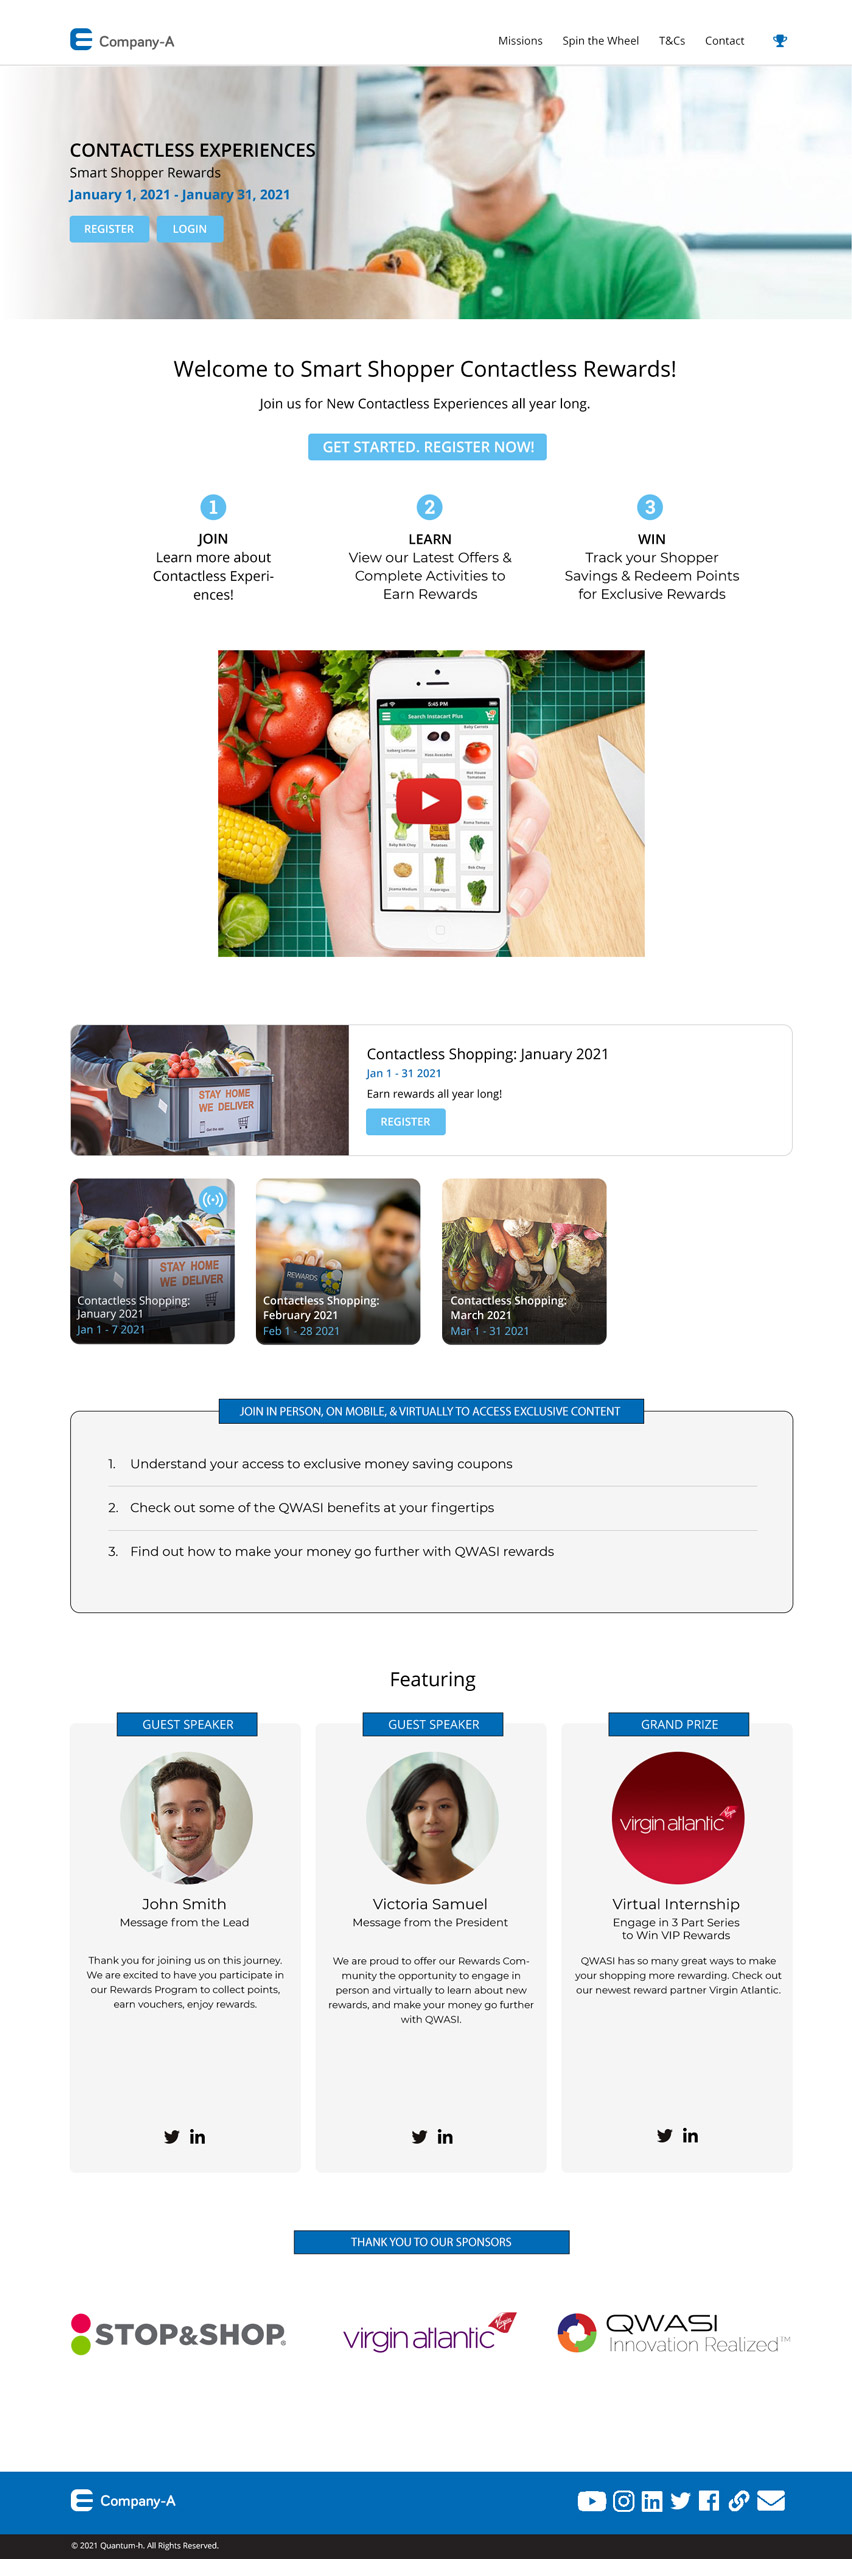 Grocery Rewards and contactless engagement